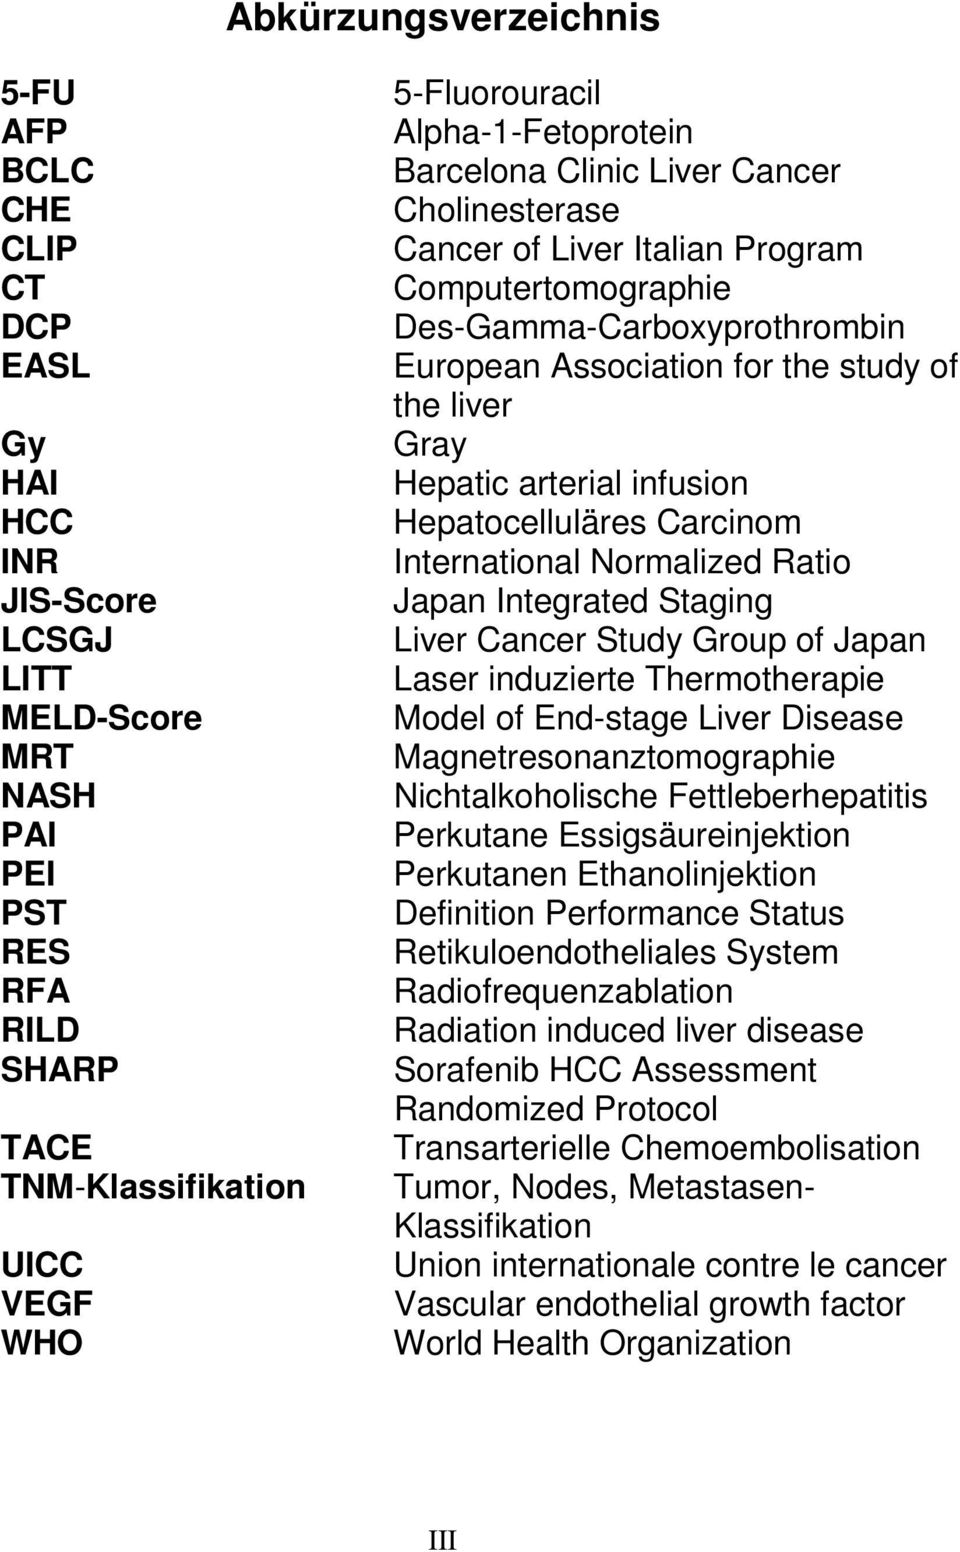 Hepatic arterial infusion Hepatocelluläres Carcinom International Normalized Ratio Japan Integrated Staging Liver Cancer Study Group of Japan Laser induzierte Thermotherapie Model of End-stage Liver